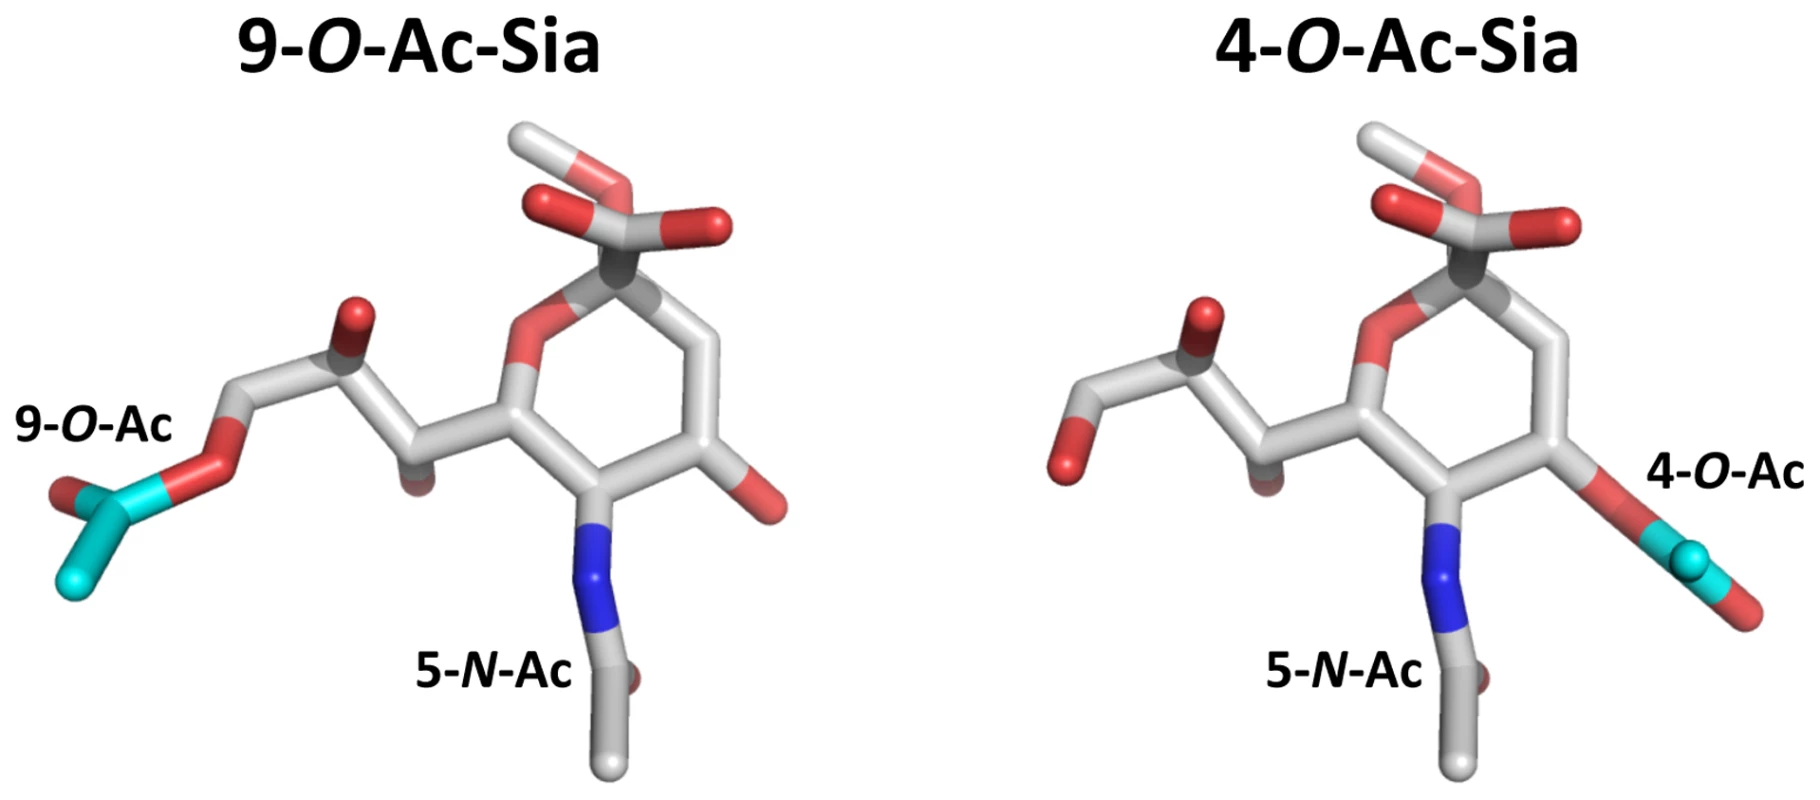 Stereochemical differences between 9-<i>O</i>- and 4-<i>O</i>-acetylated sialic acid.